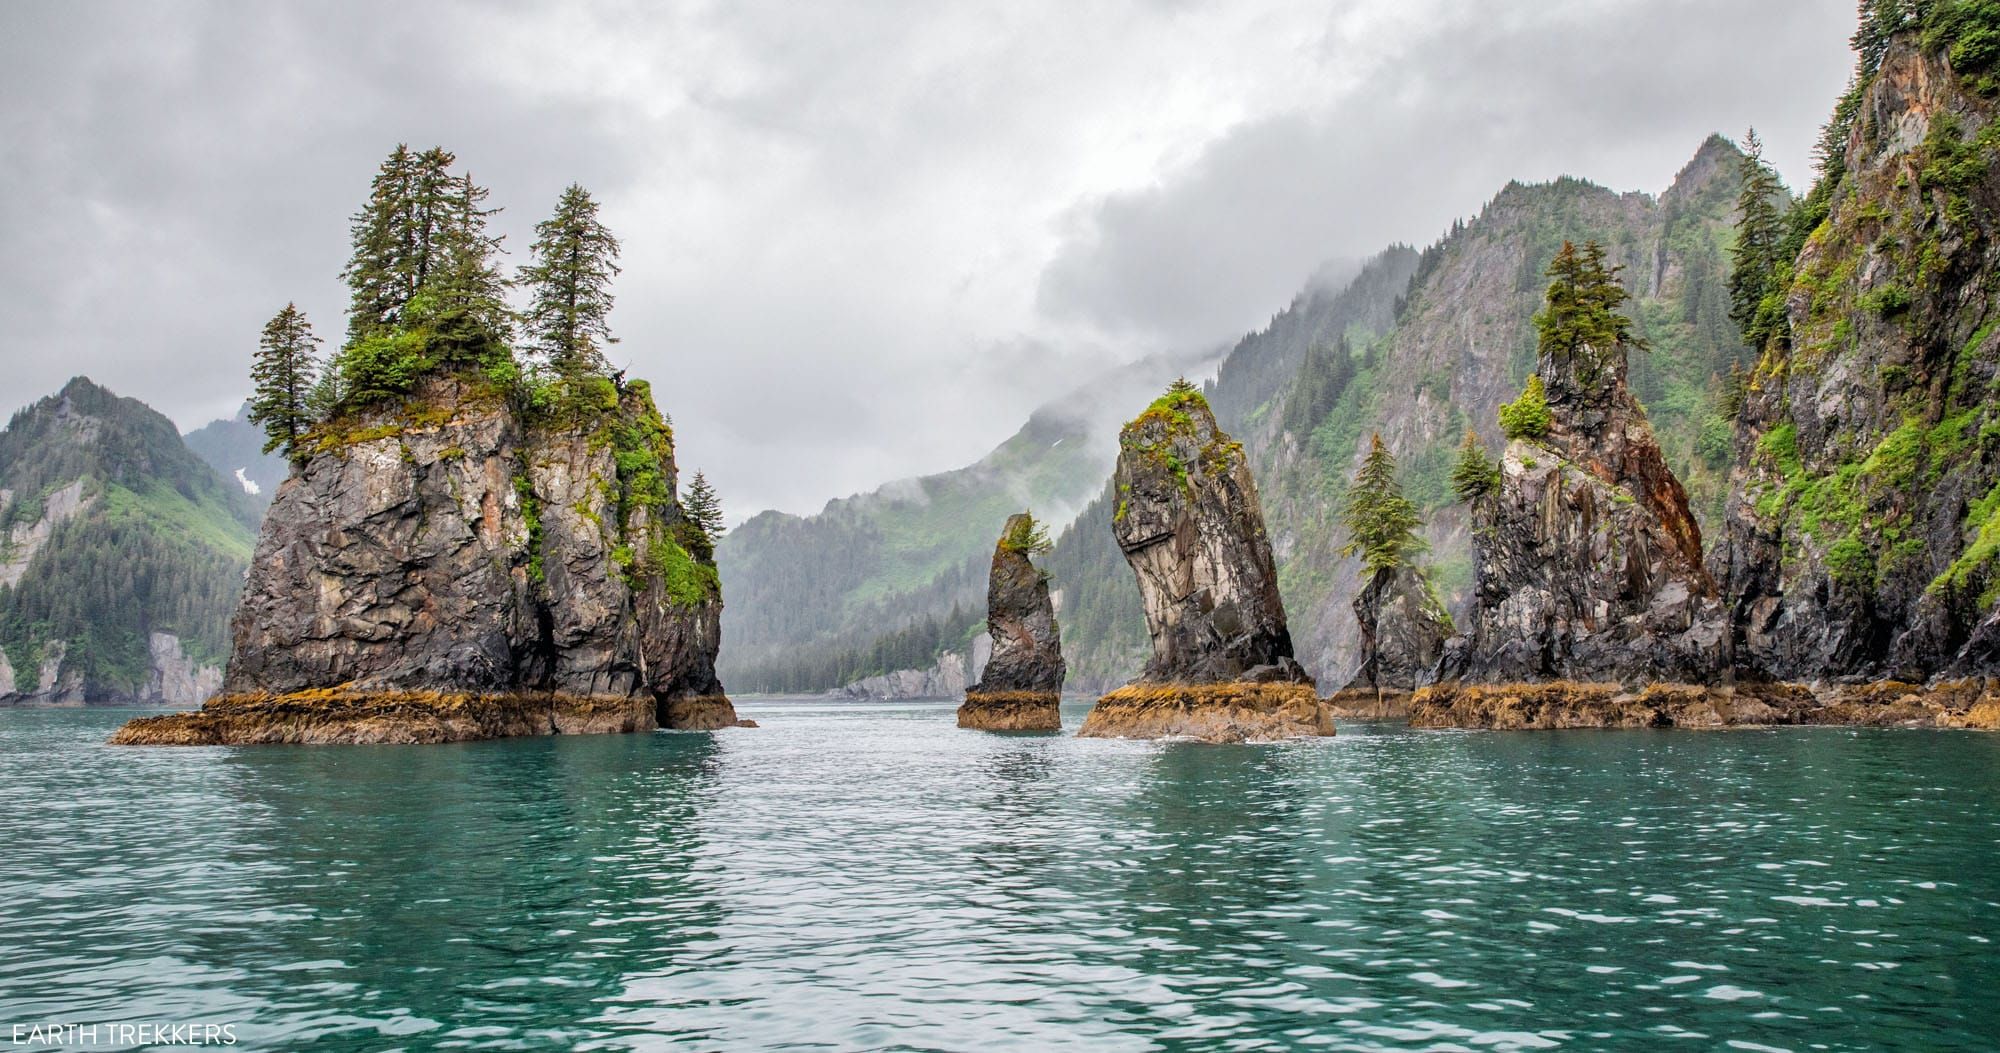 Featured image for “9 Amazing Things to Do in Kenai Fjords National Park”